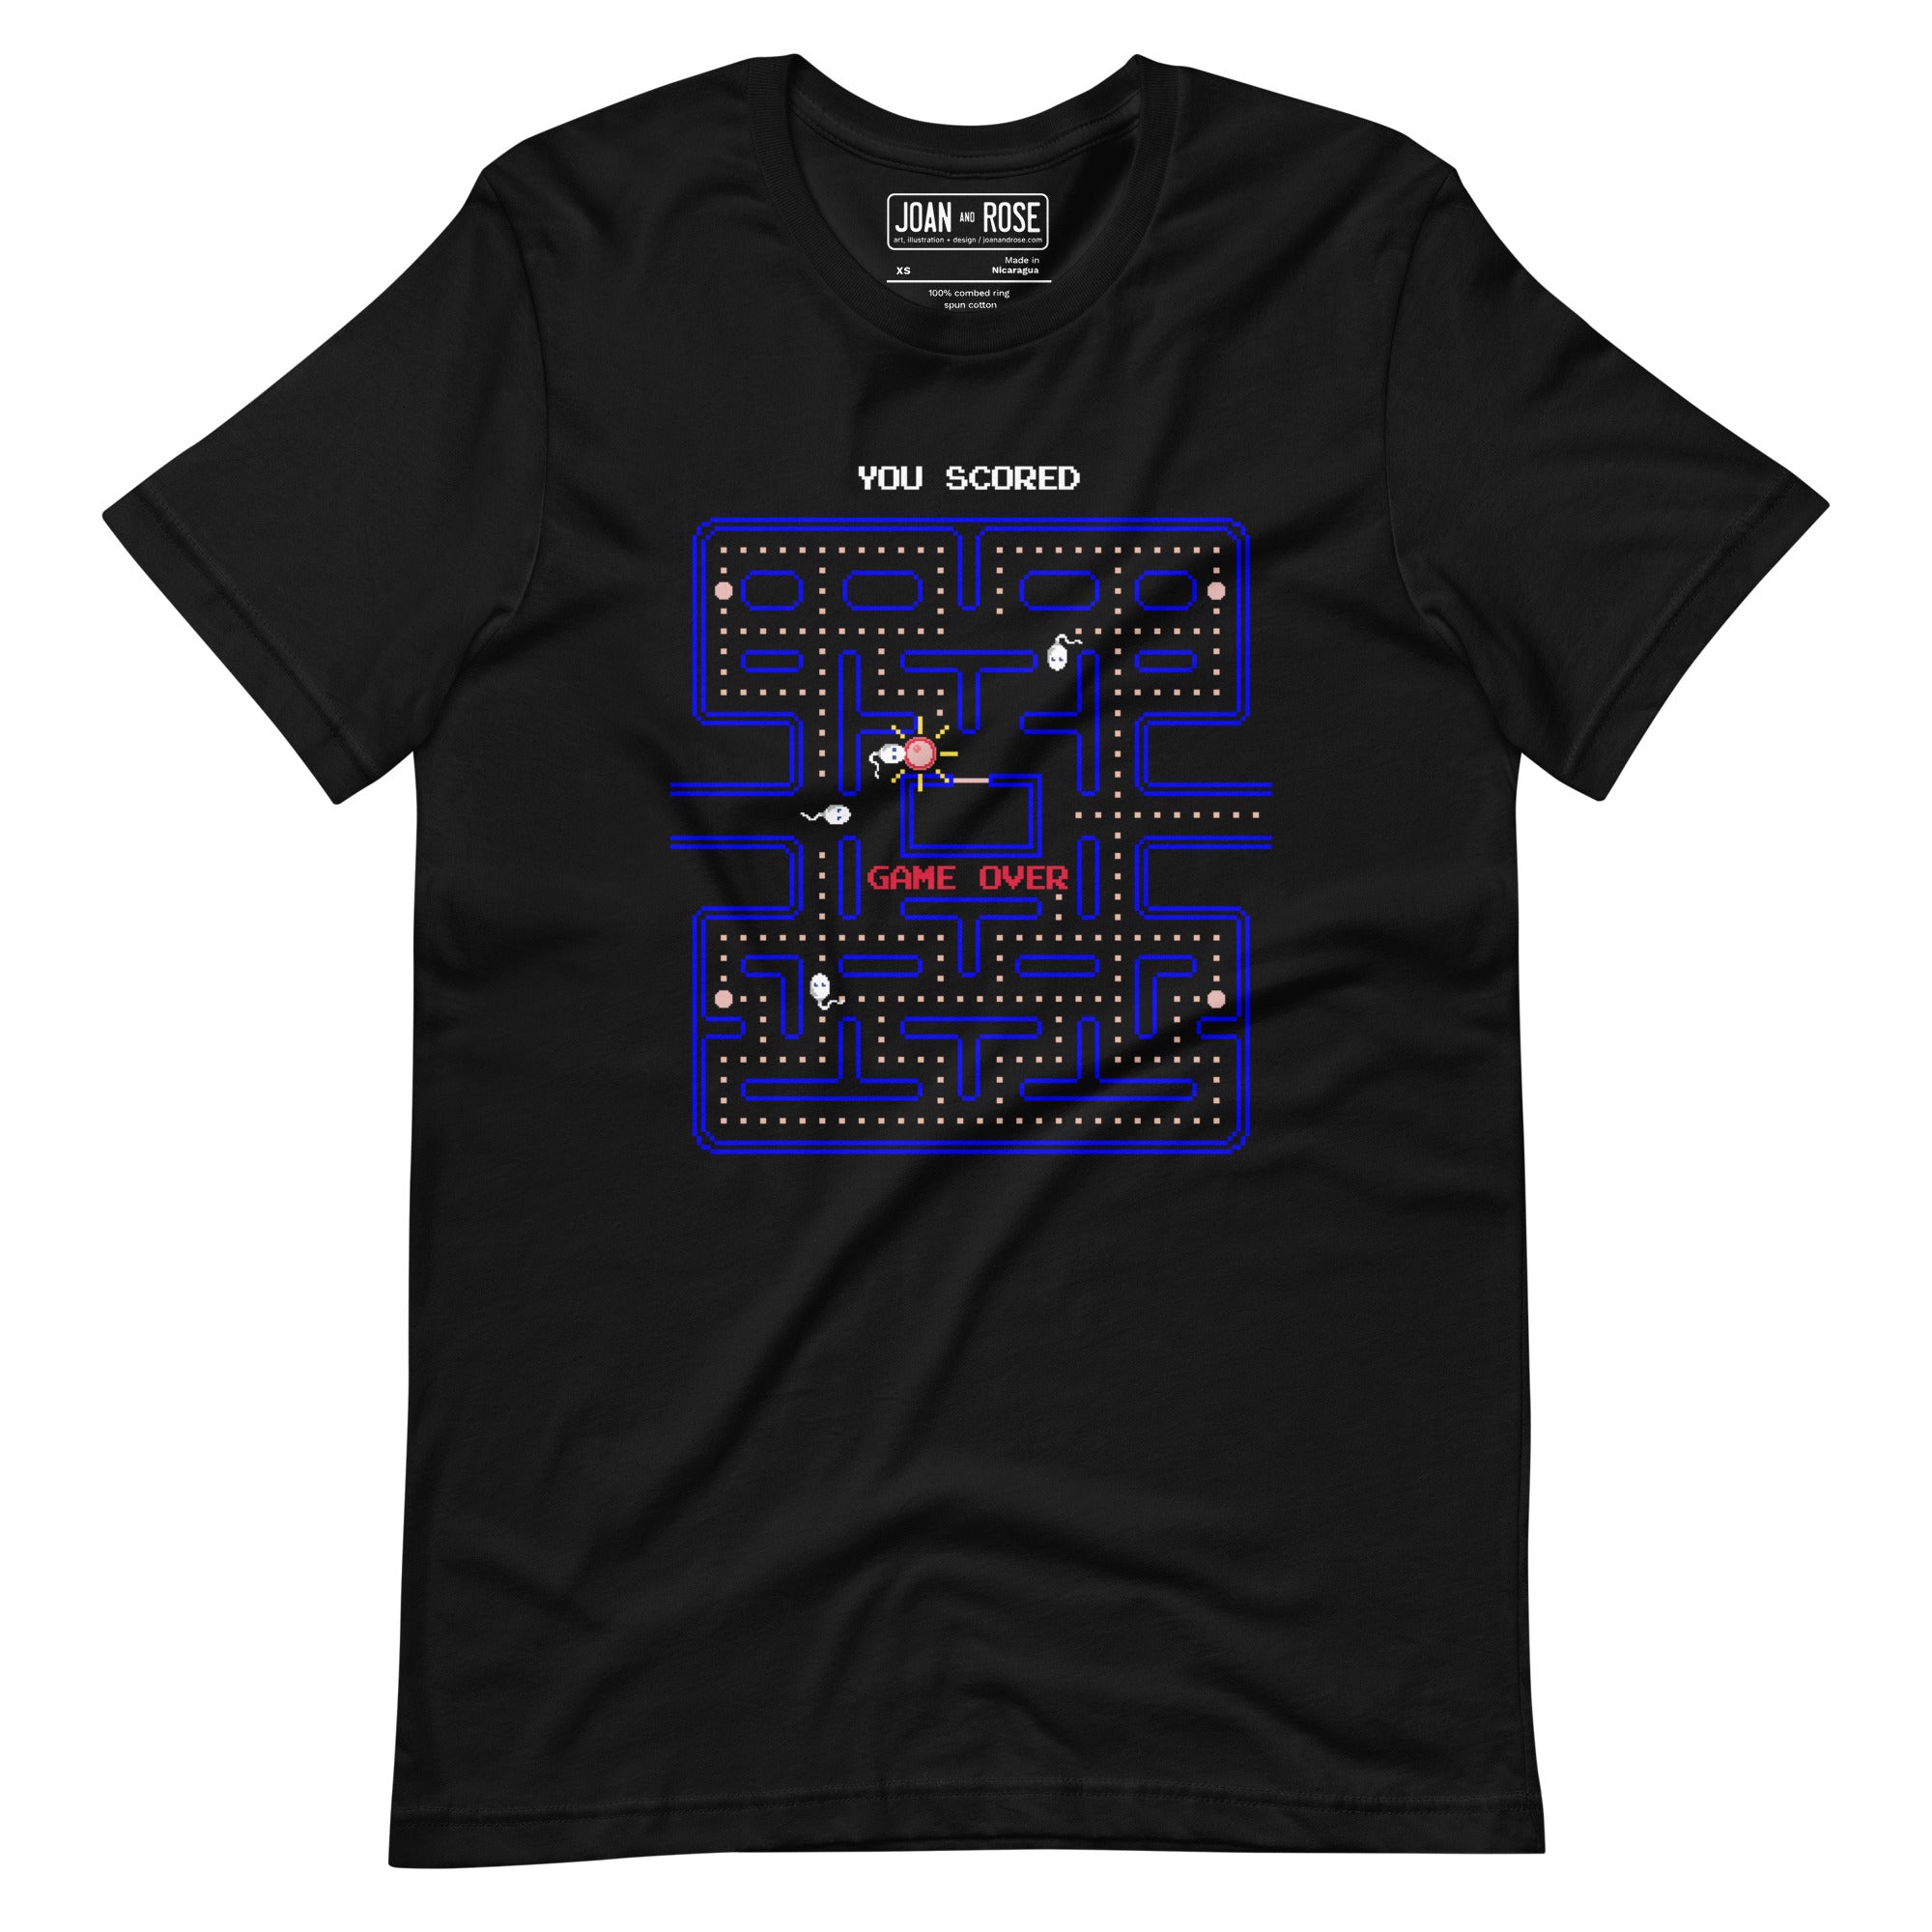 black t-shirt with parody pacman 8 bit graphic. Ghosts are sperms and pacman character is a females egg. A sperm has caught the egg and the text You Scored, Game Over appears over the image